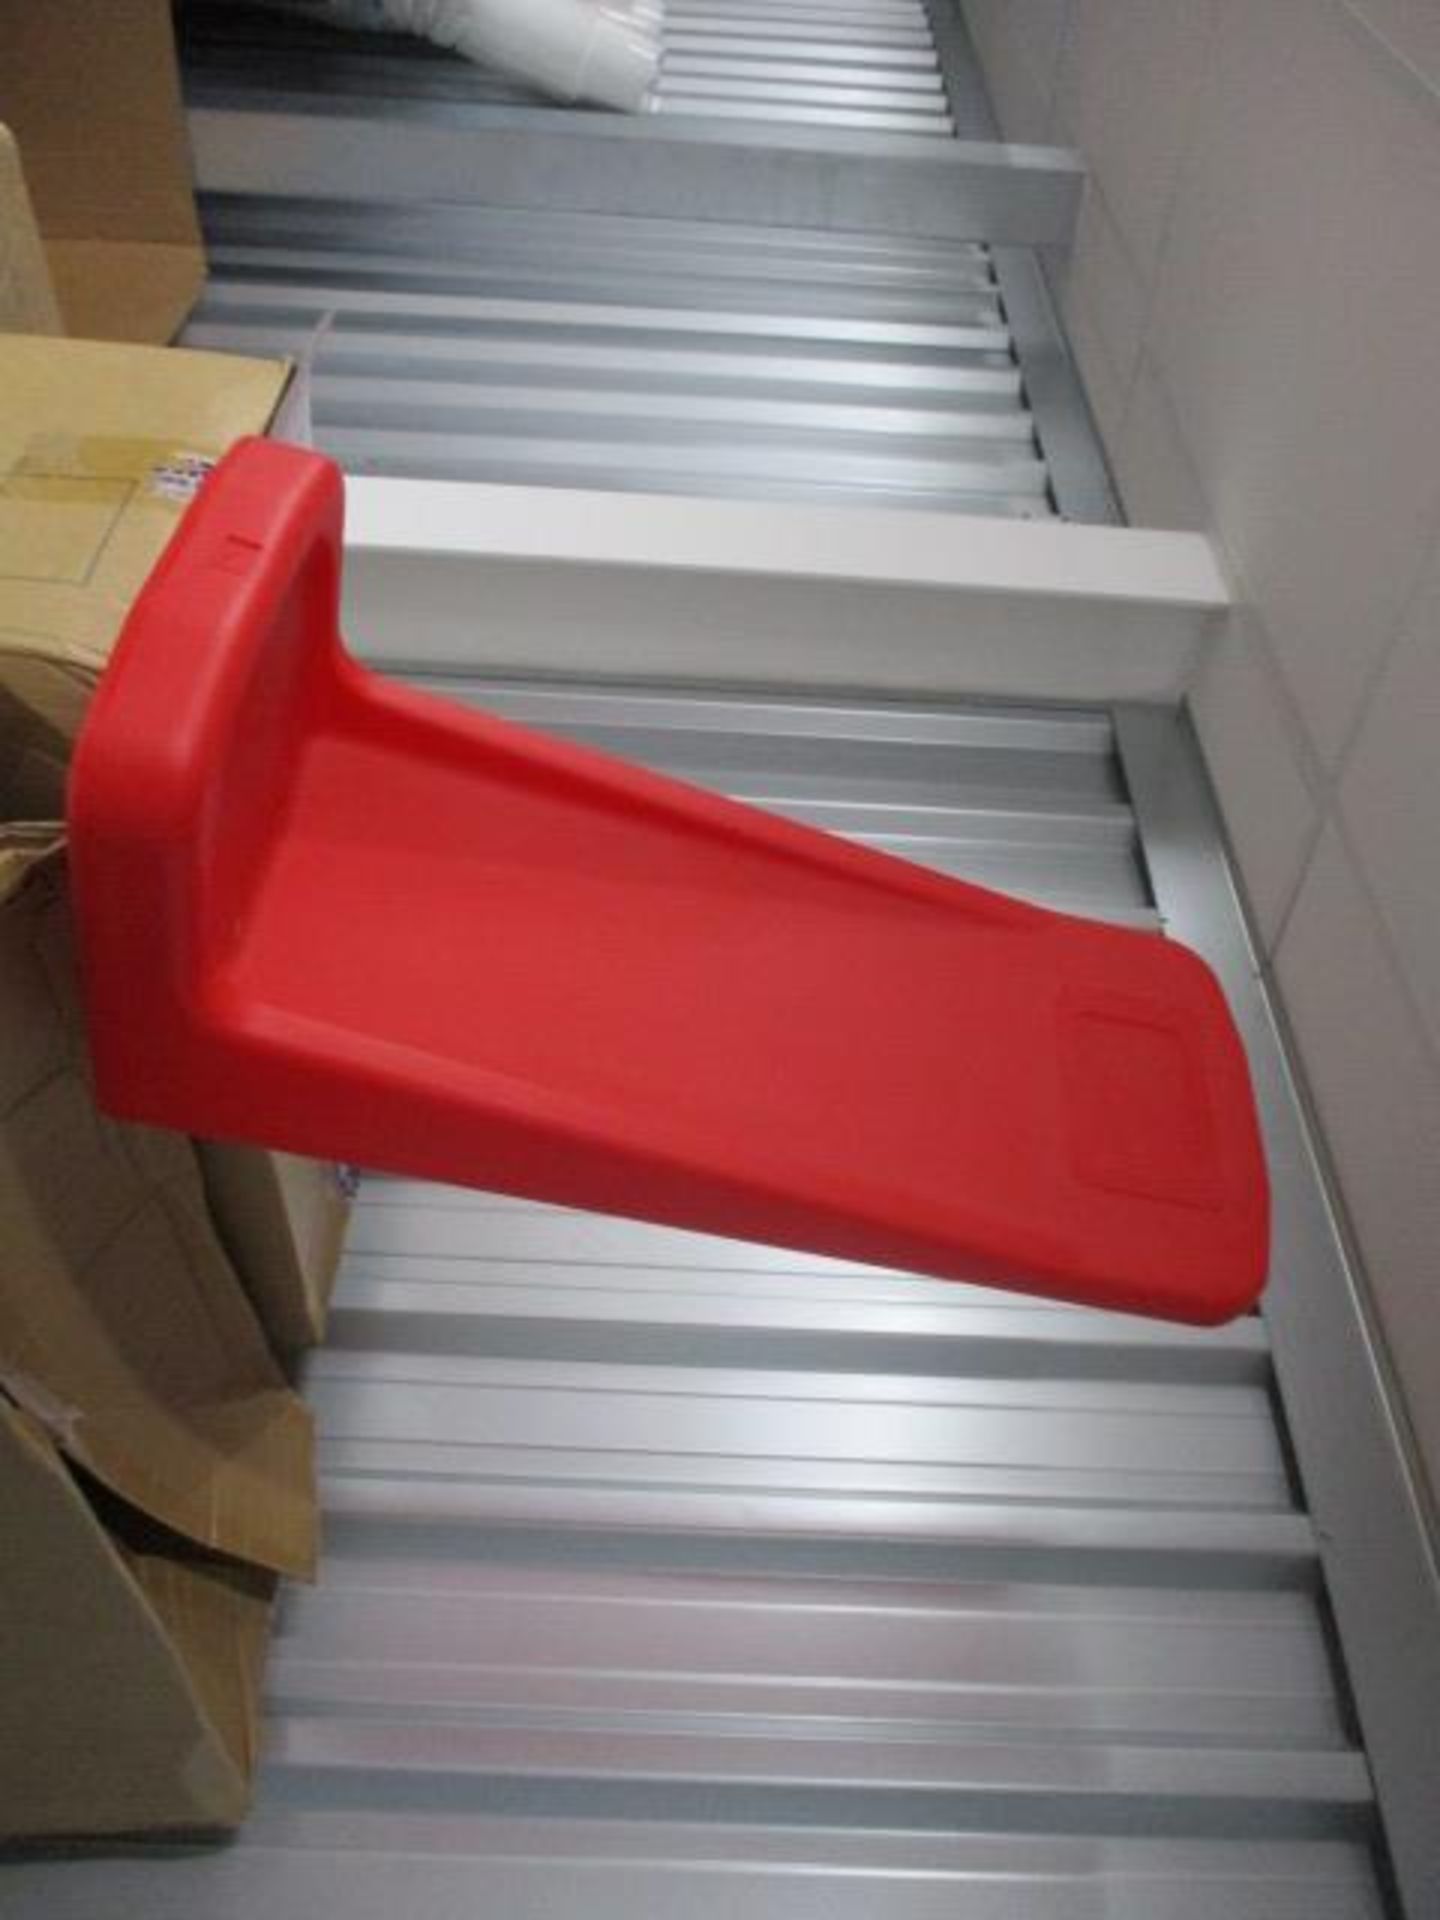 Fire extinguisher stands - Image 3 of 5